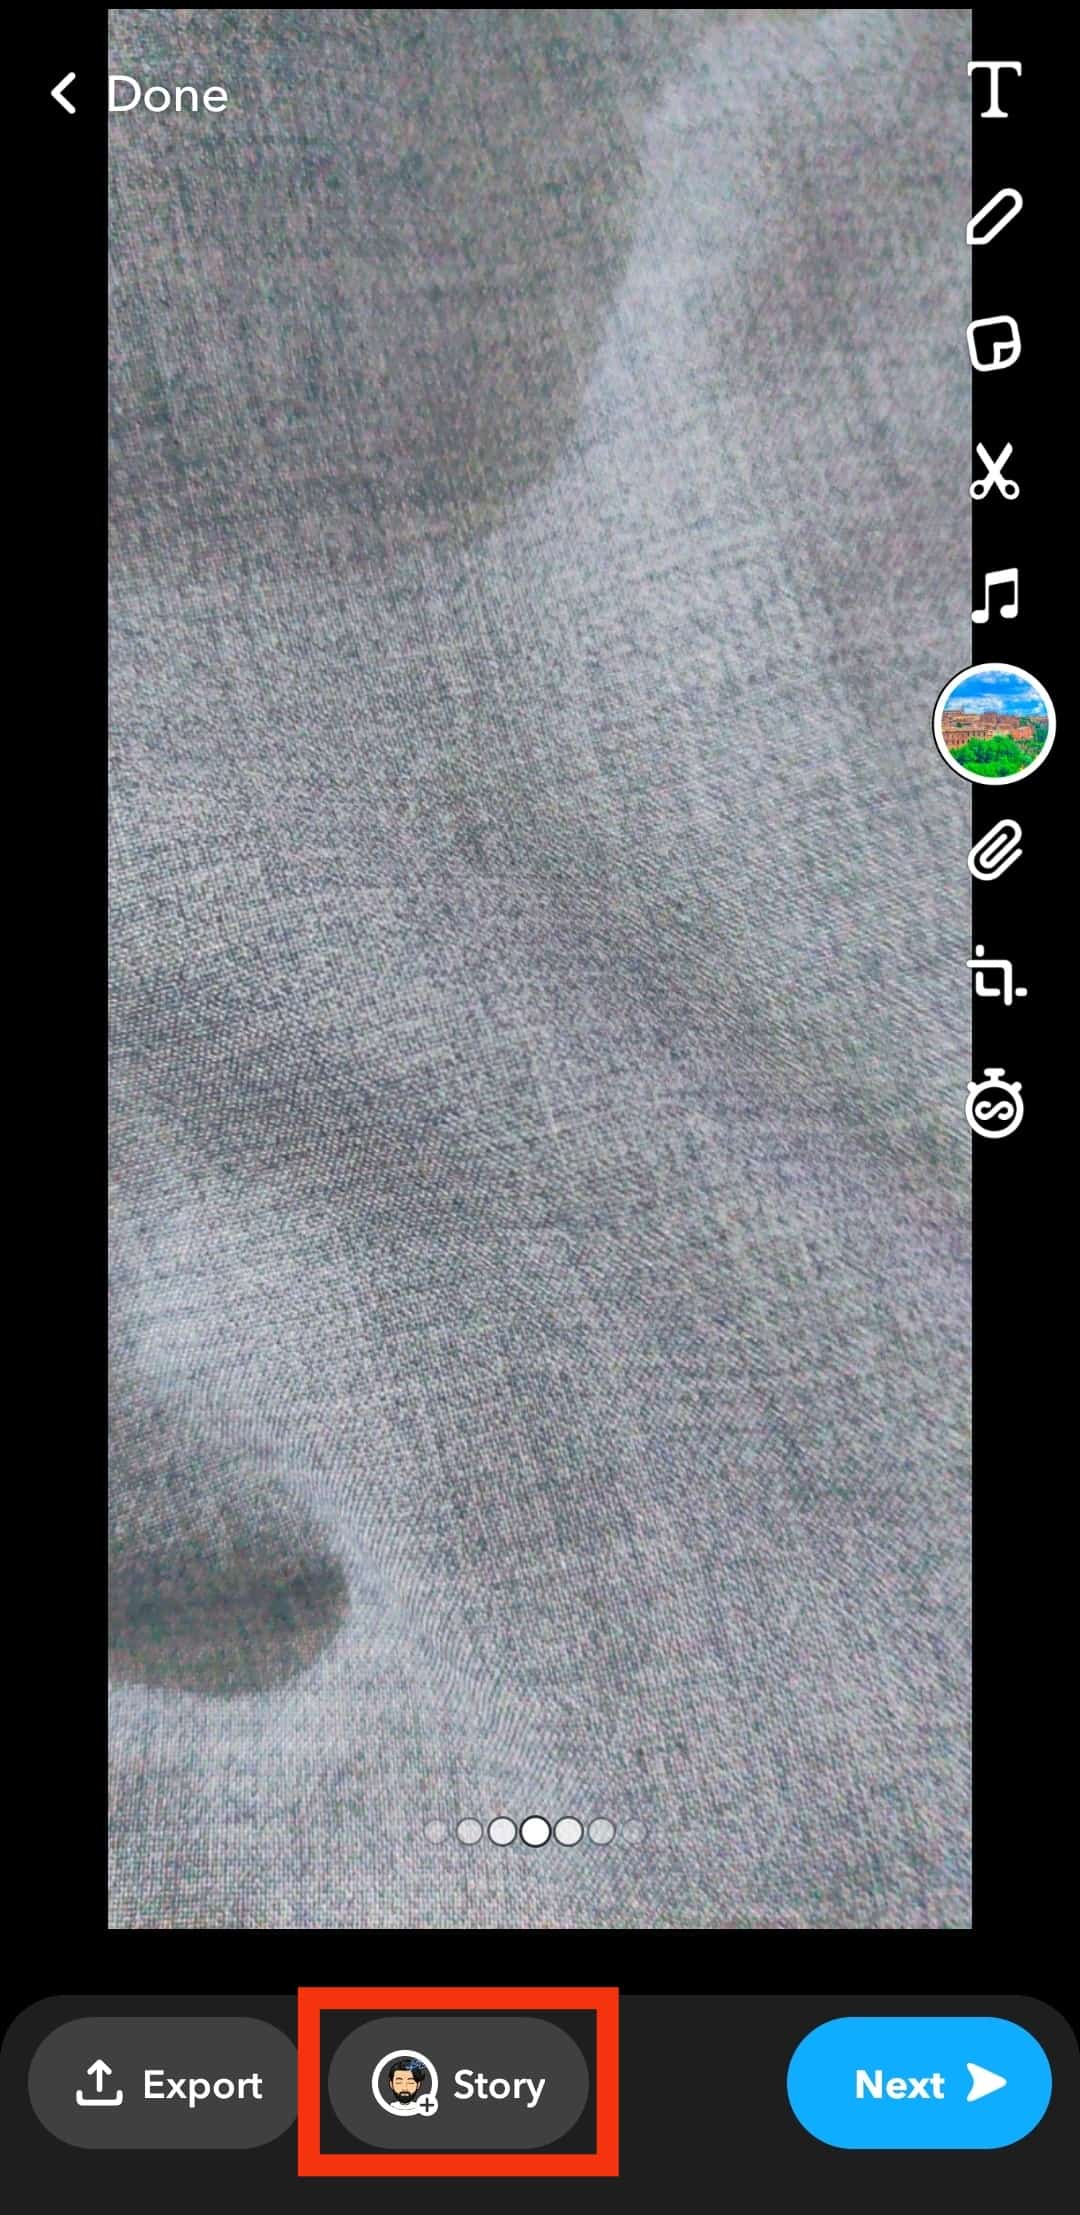 Tap On The Story Option